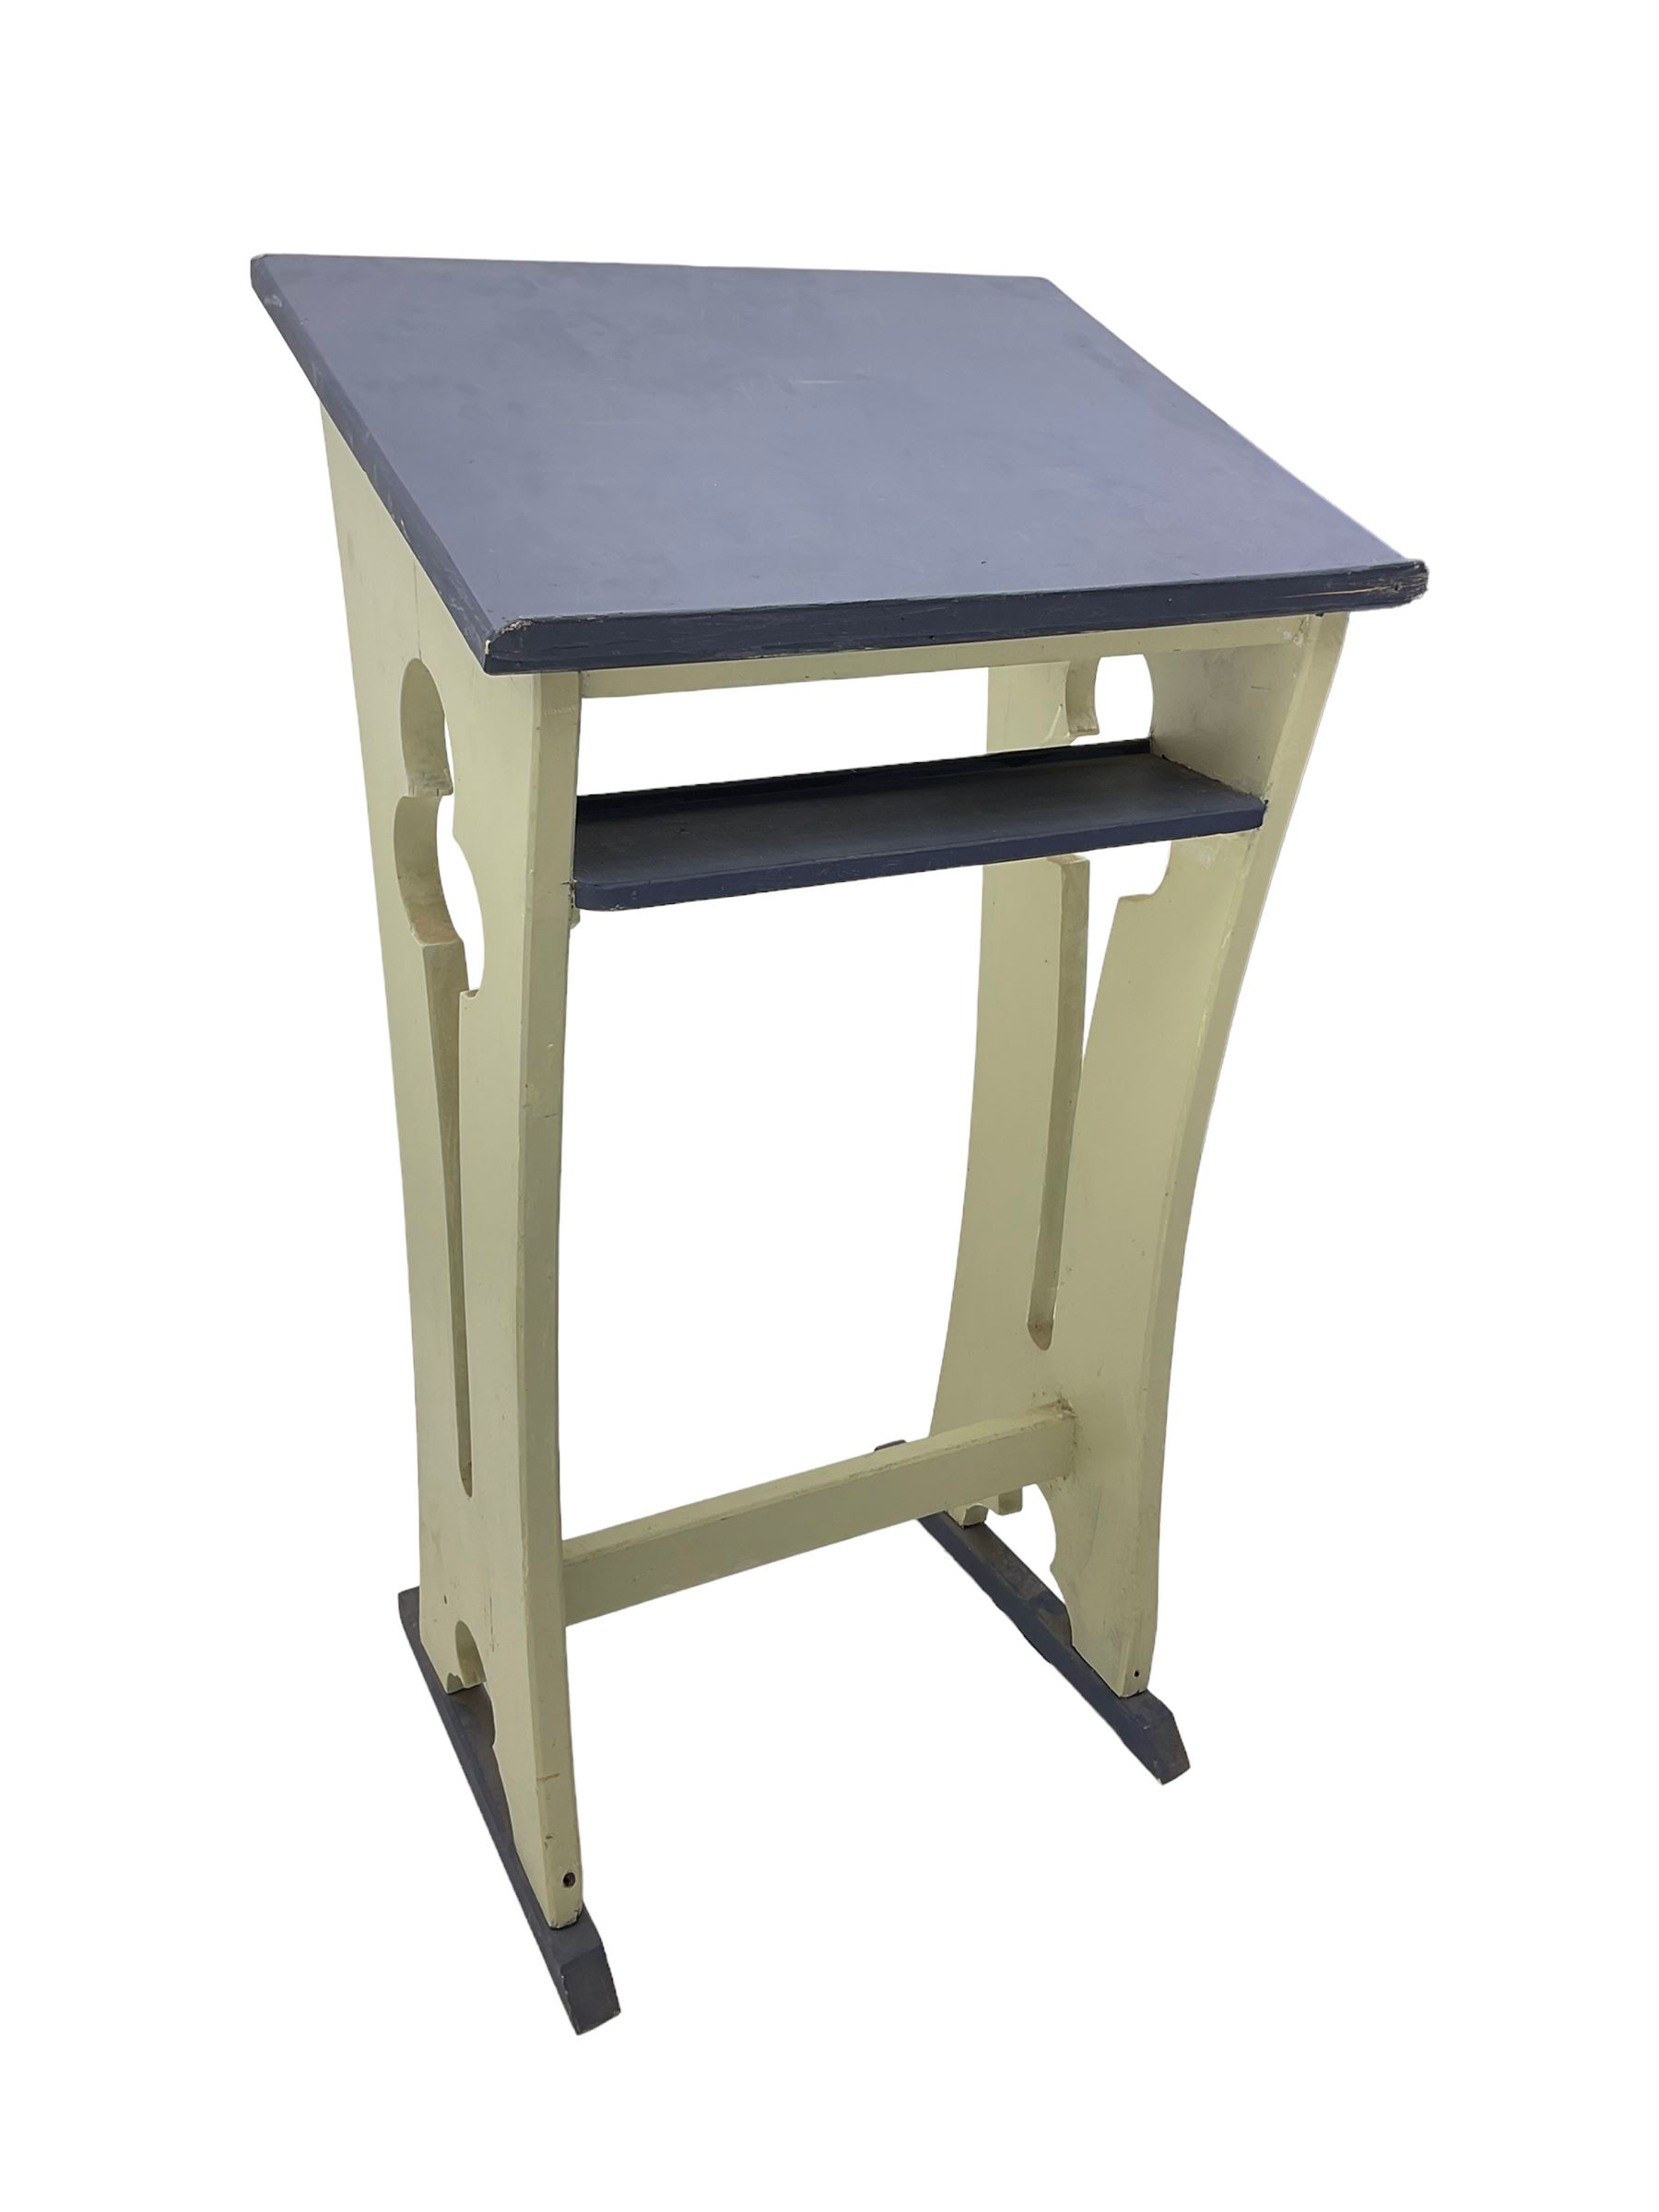 Mid-20th century painted pine ecclesiastical lectern - Image 3 of 10